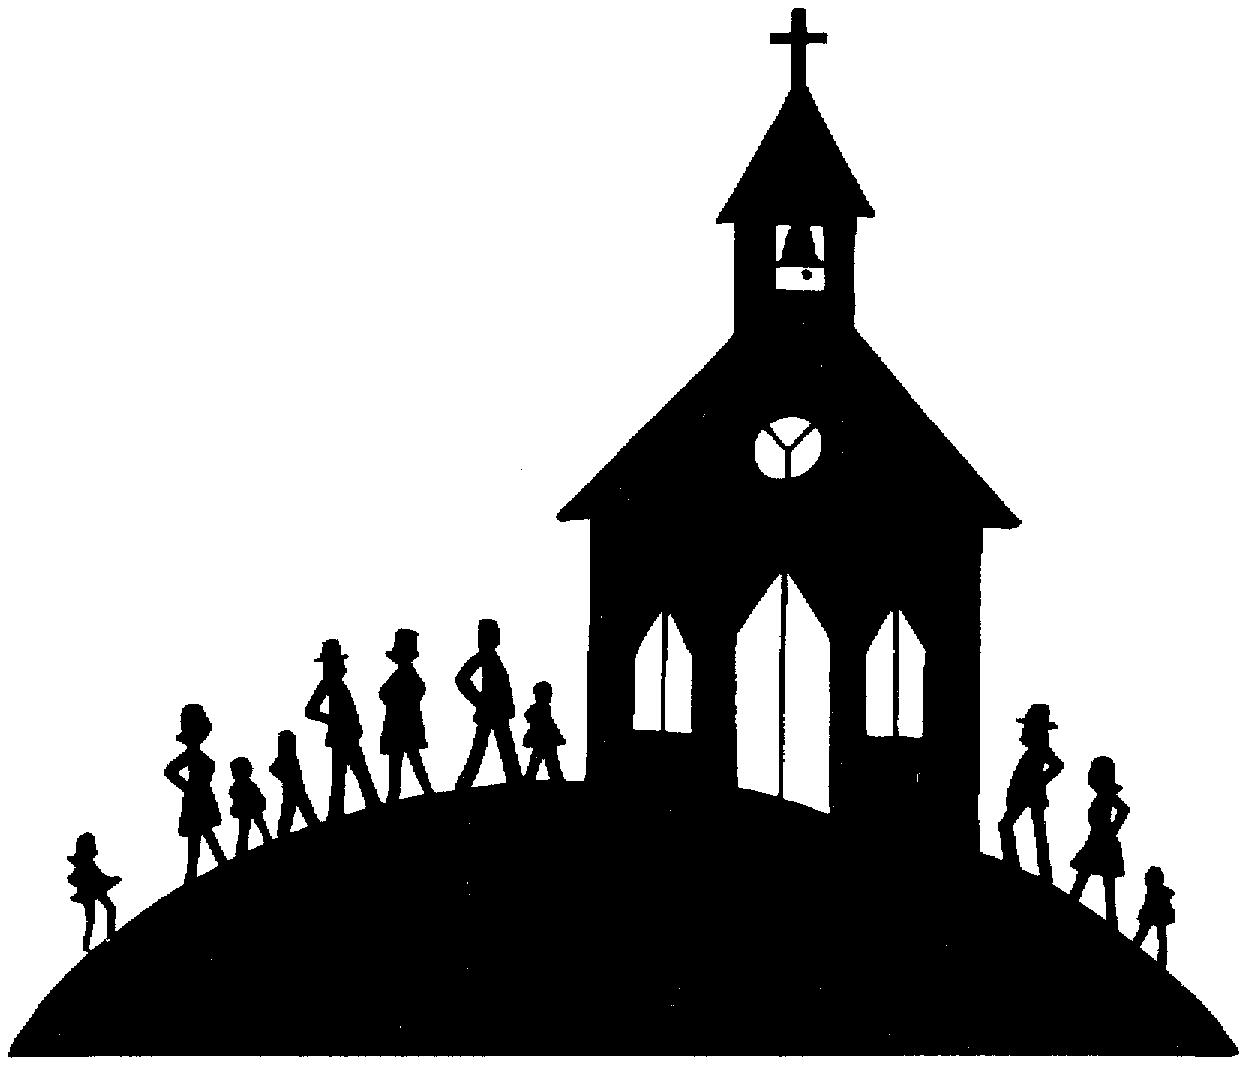 ... Clip Art Church u0026middot; Immanuel Congregational Ucc Wherever You Are On Life S Journey